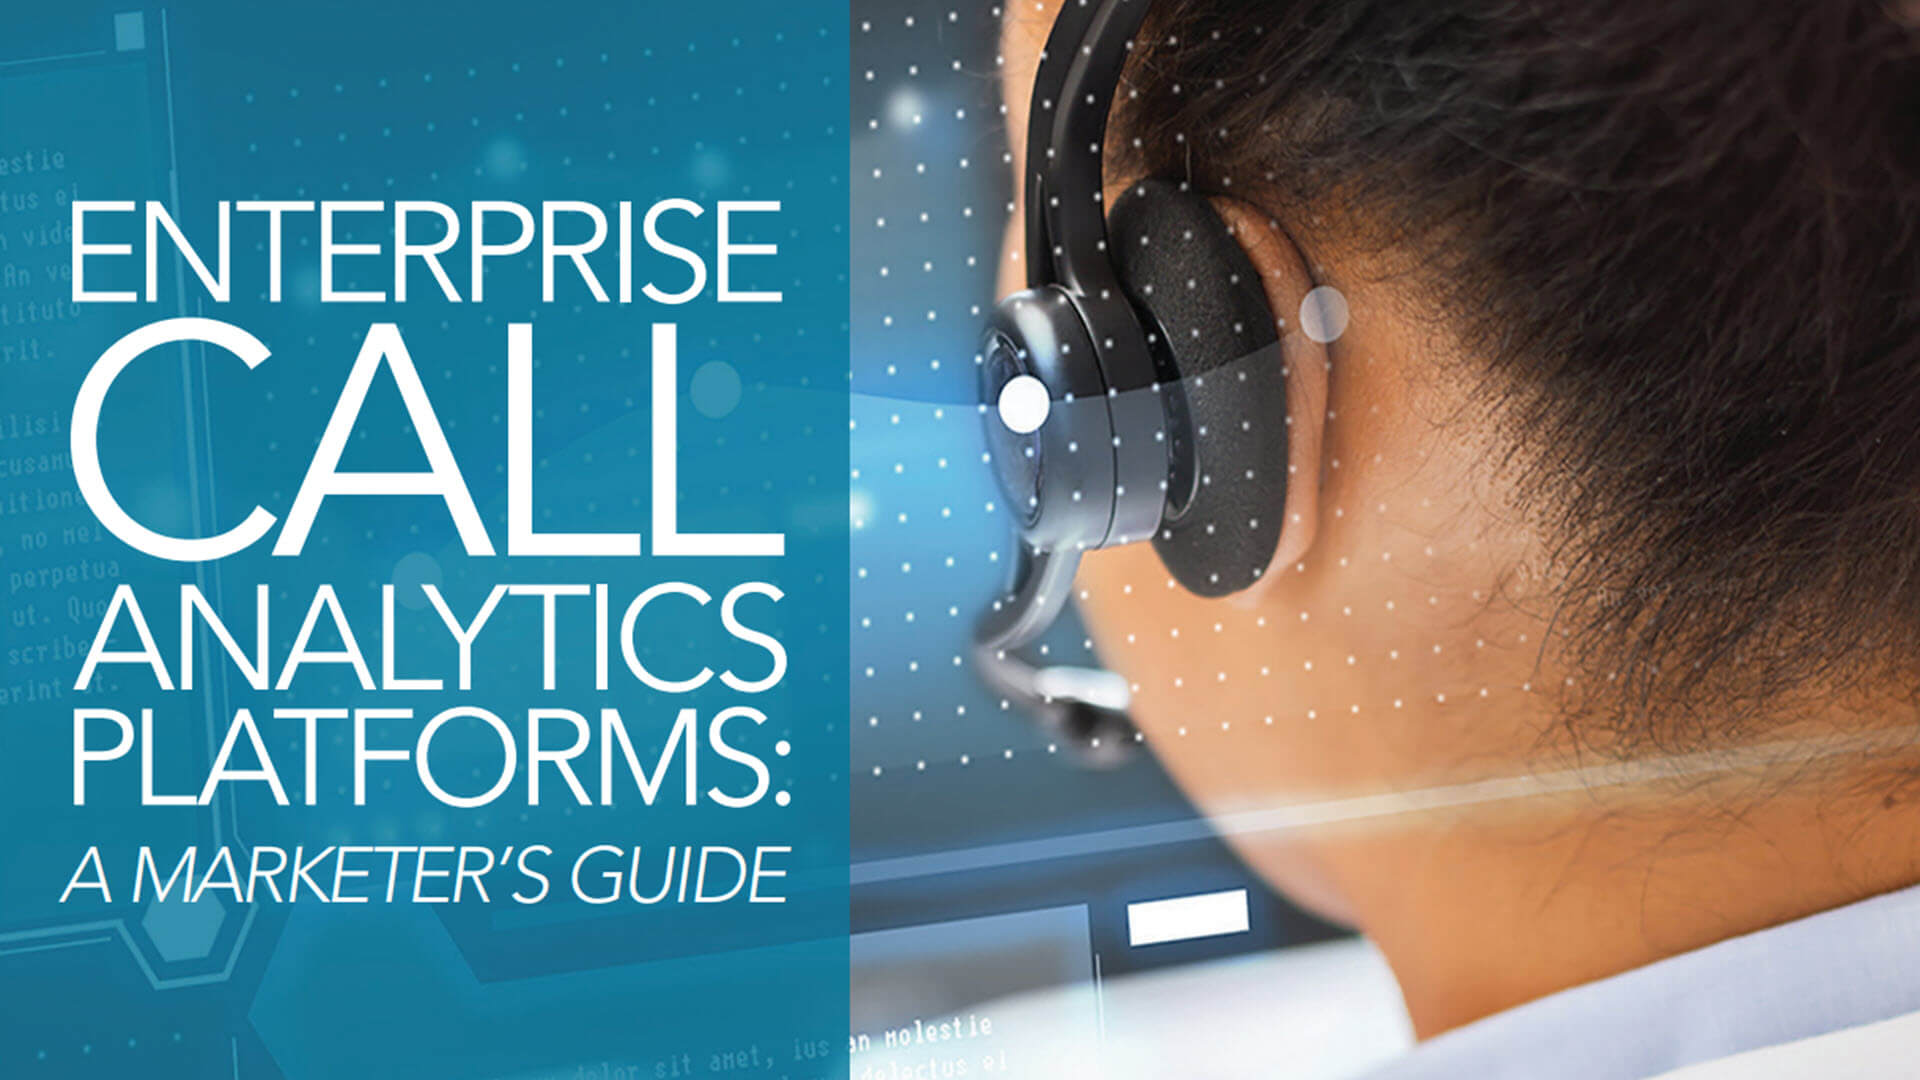 Enterprise Call Analytics Platforms: A Marketer's Guide - updated for 2019!